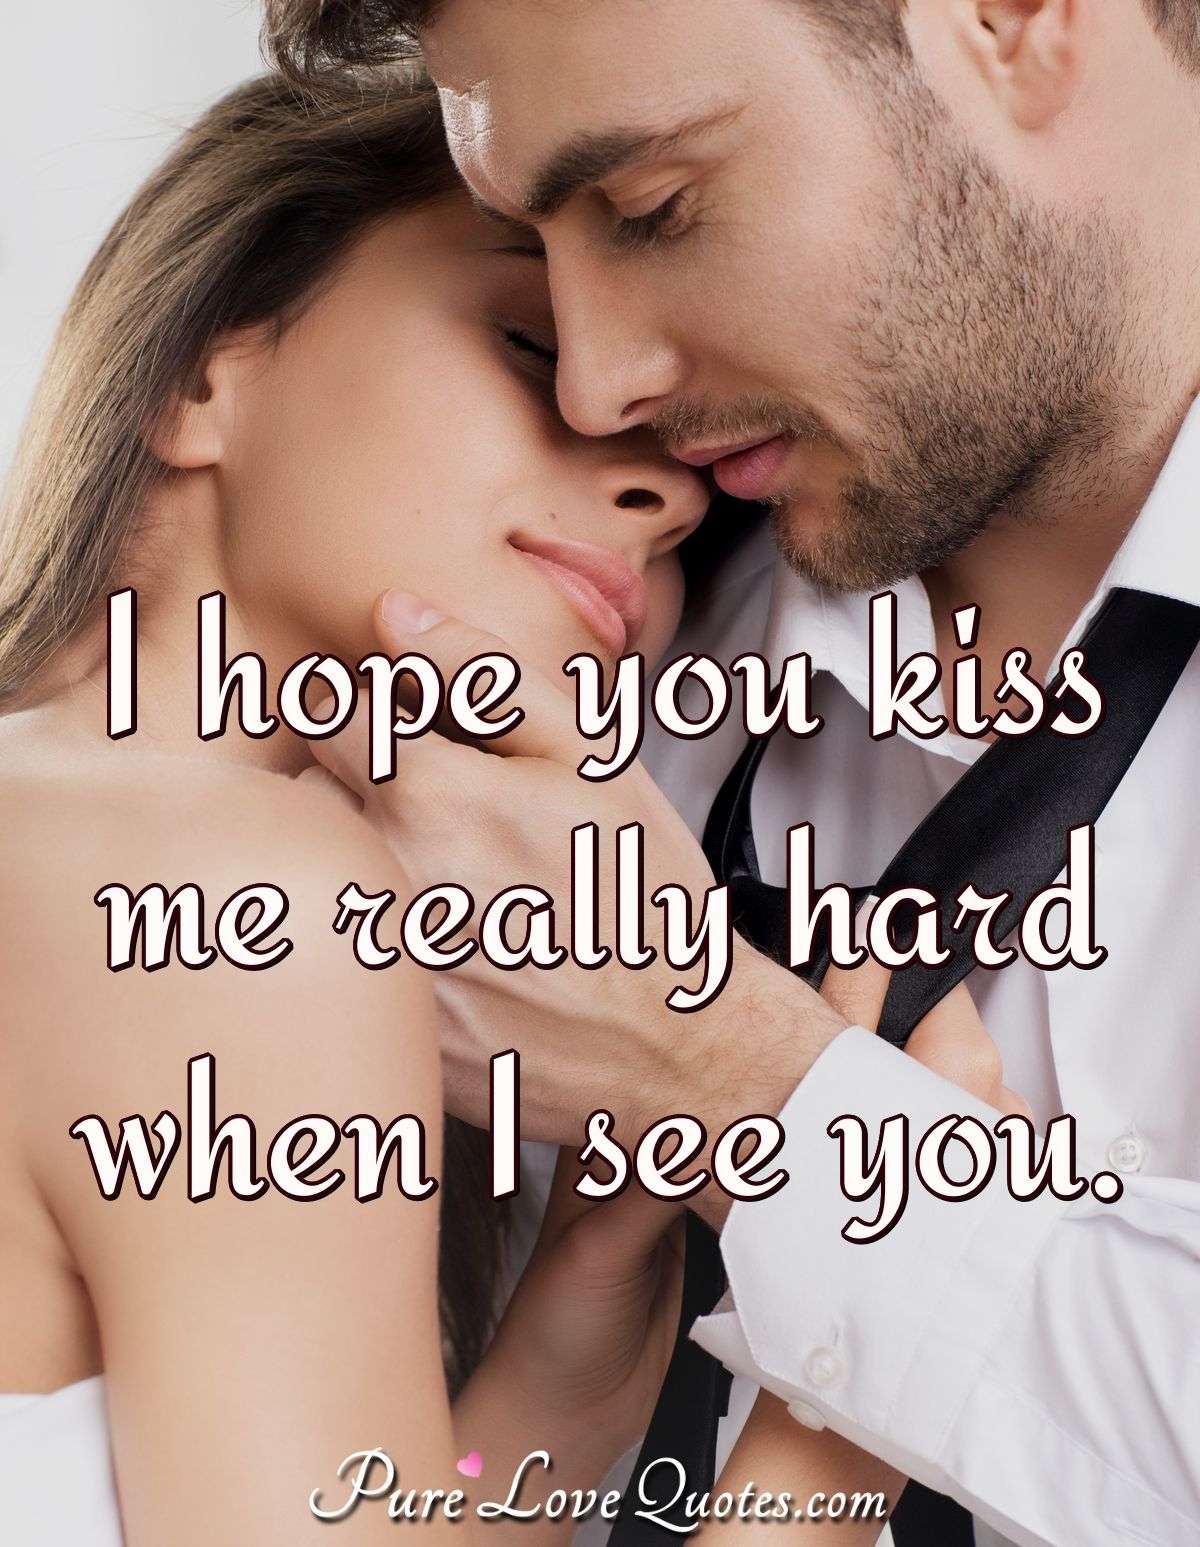 I hope you kiss me really hard when I see you. - Anonymous